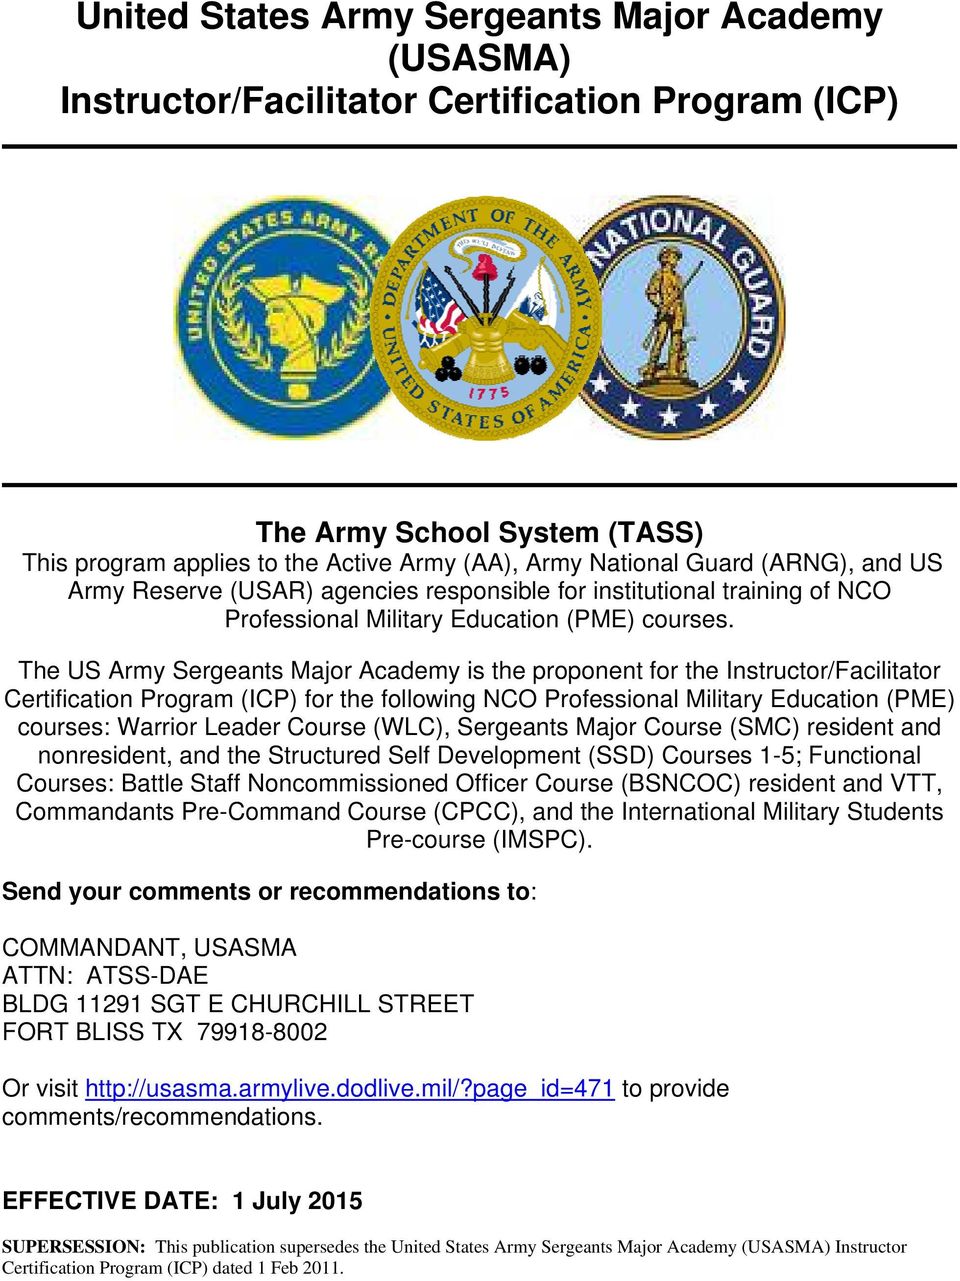 The US Army Sergeants Major Academy is the proponent for the Instructor/Facilitator Certification Program (ICP) for the following NCO Professional Military Education (PME) courses: Warrior Leader